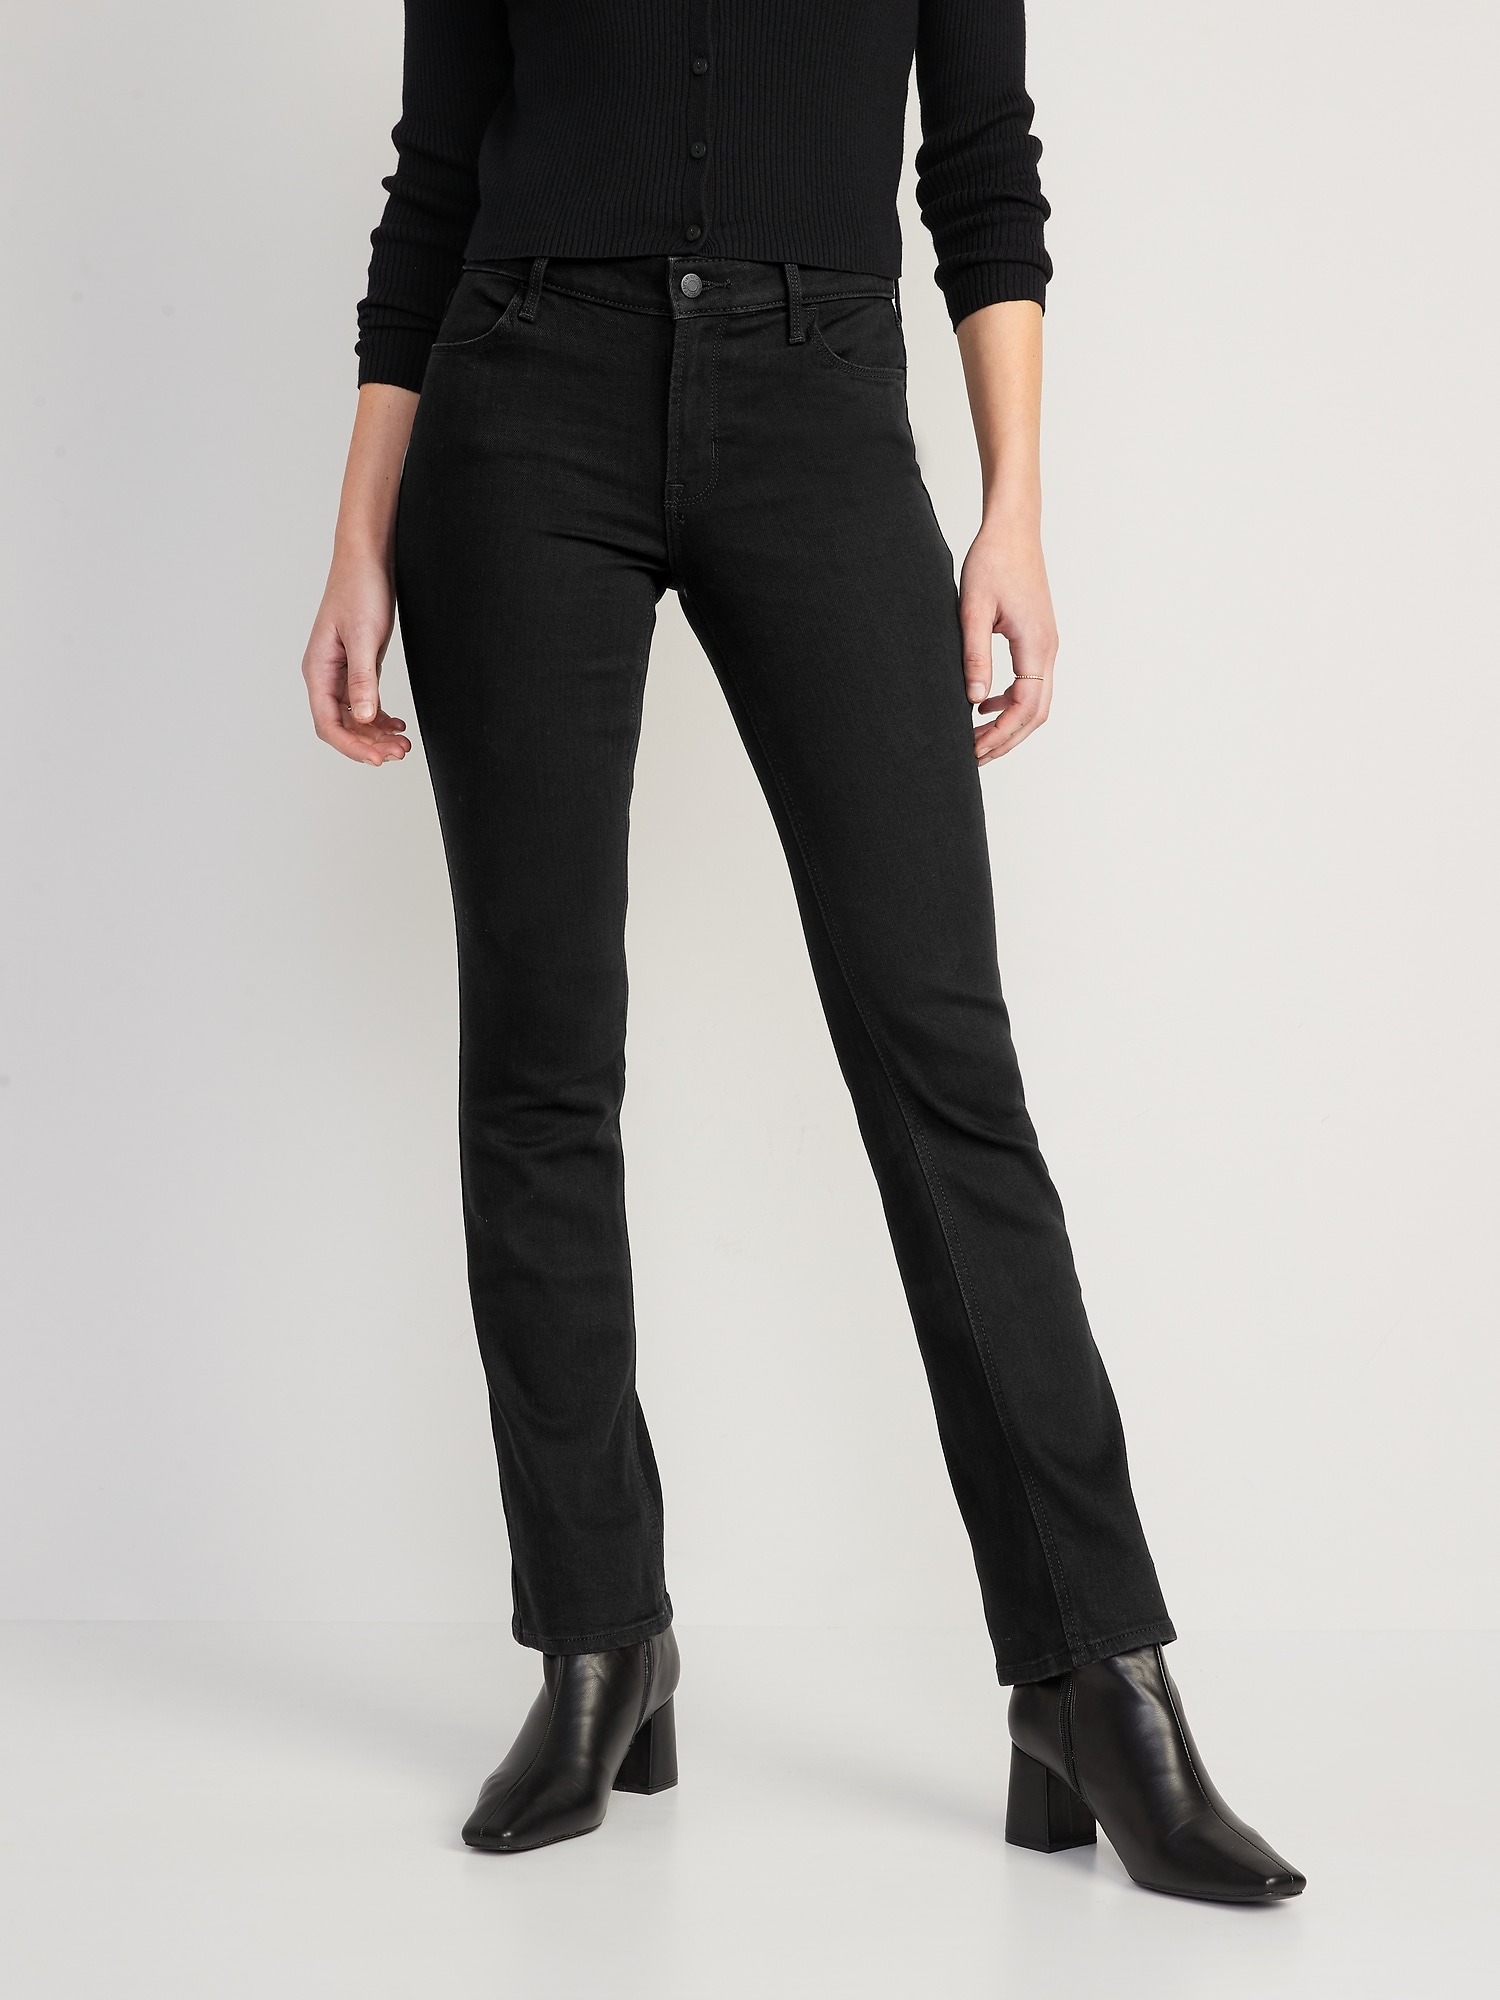 Wow Boot-Cut Black Jeans for Women | Old Navy